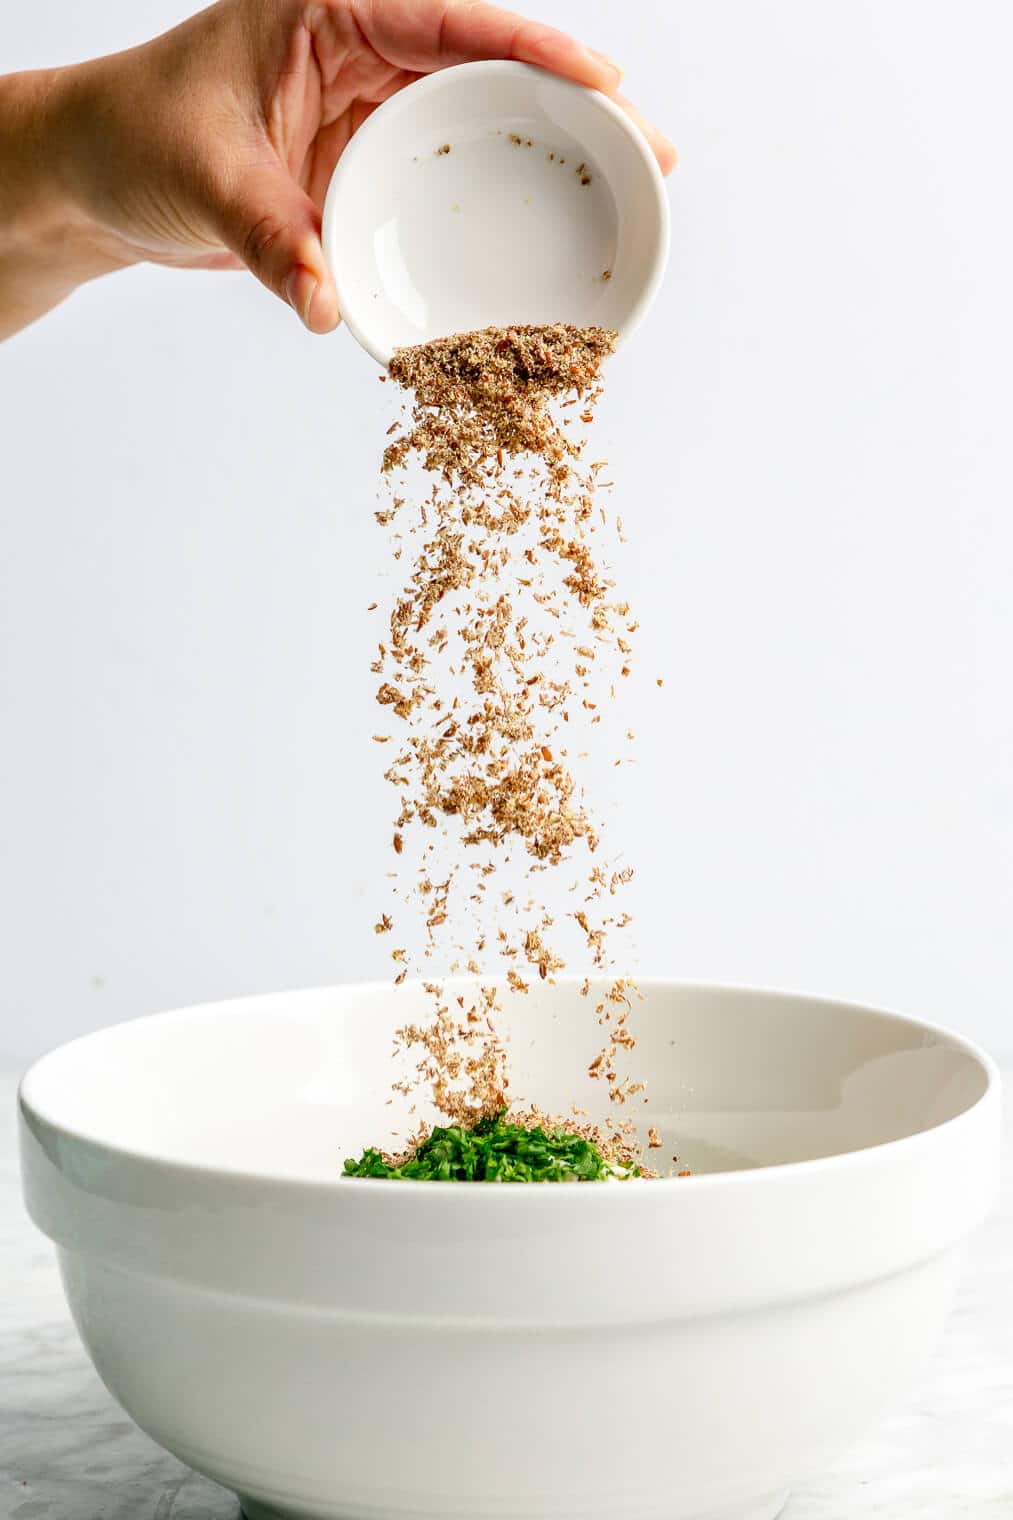 A small measuring cup of flax meal being added to a large bowl of ground chicken, fresh parsley, and panko bread crumbs to make homemade chicken burgers.